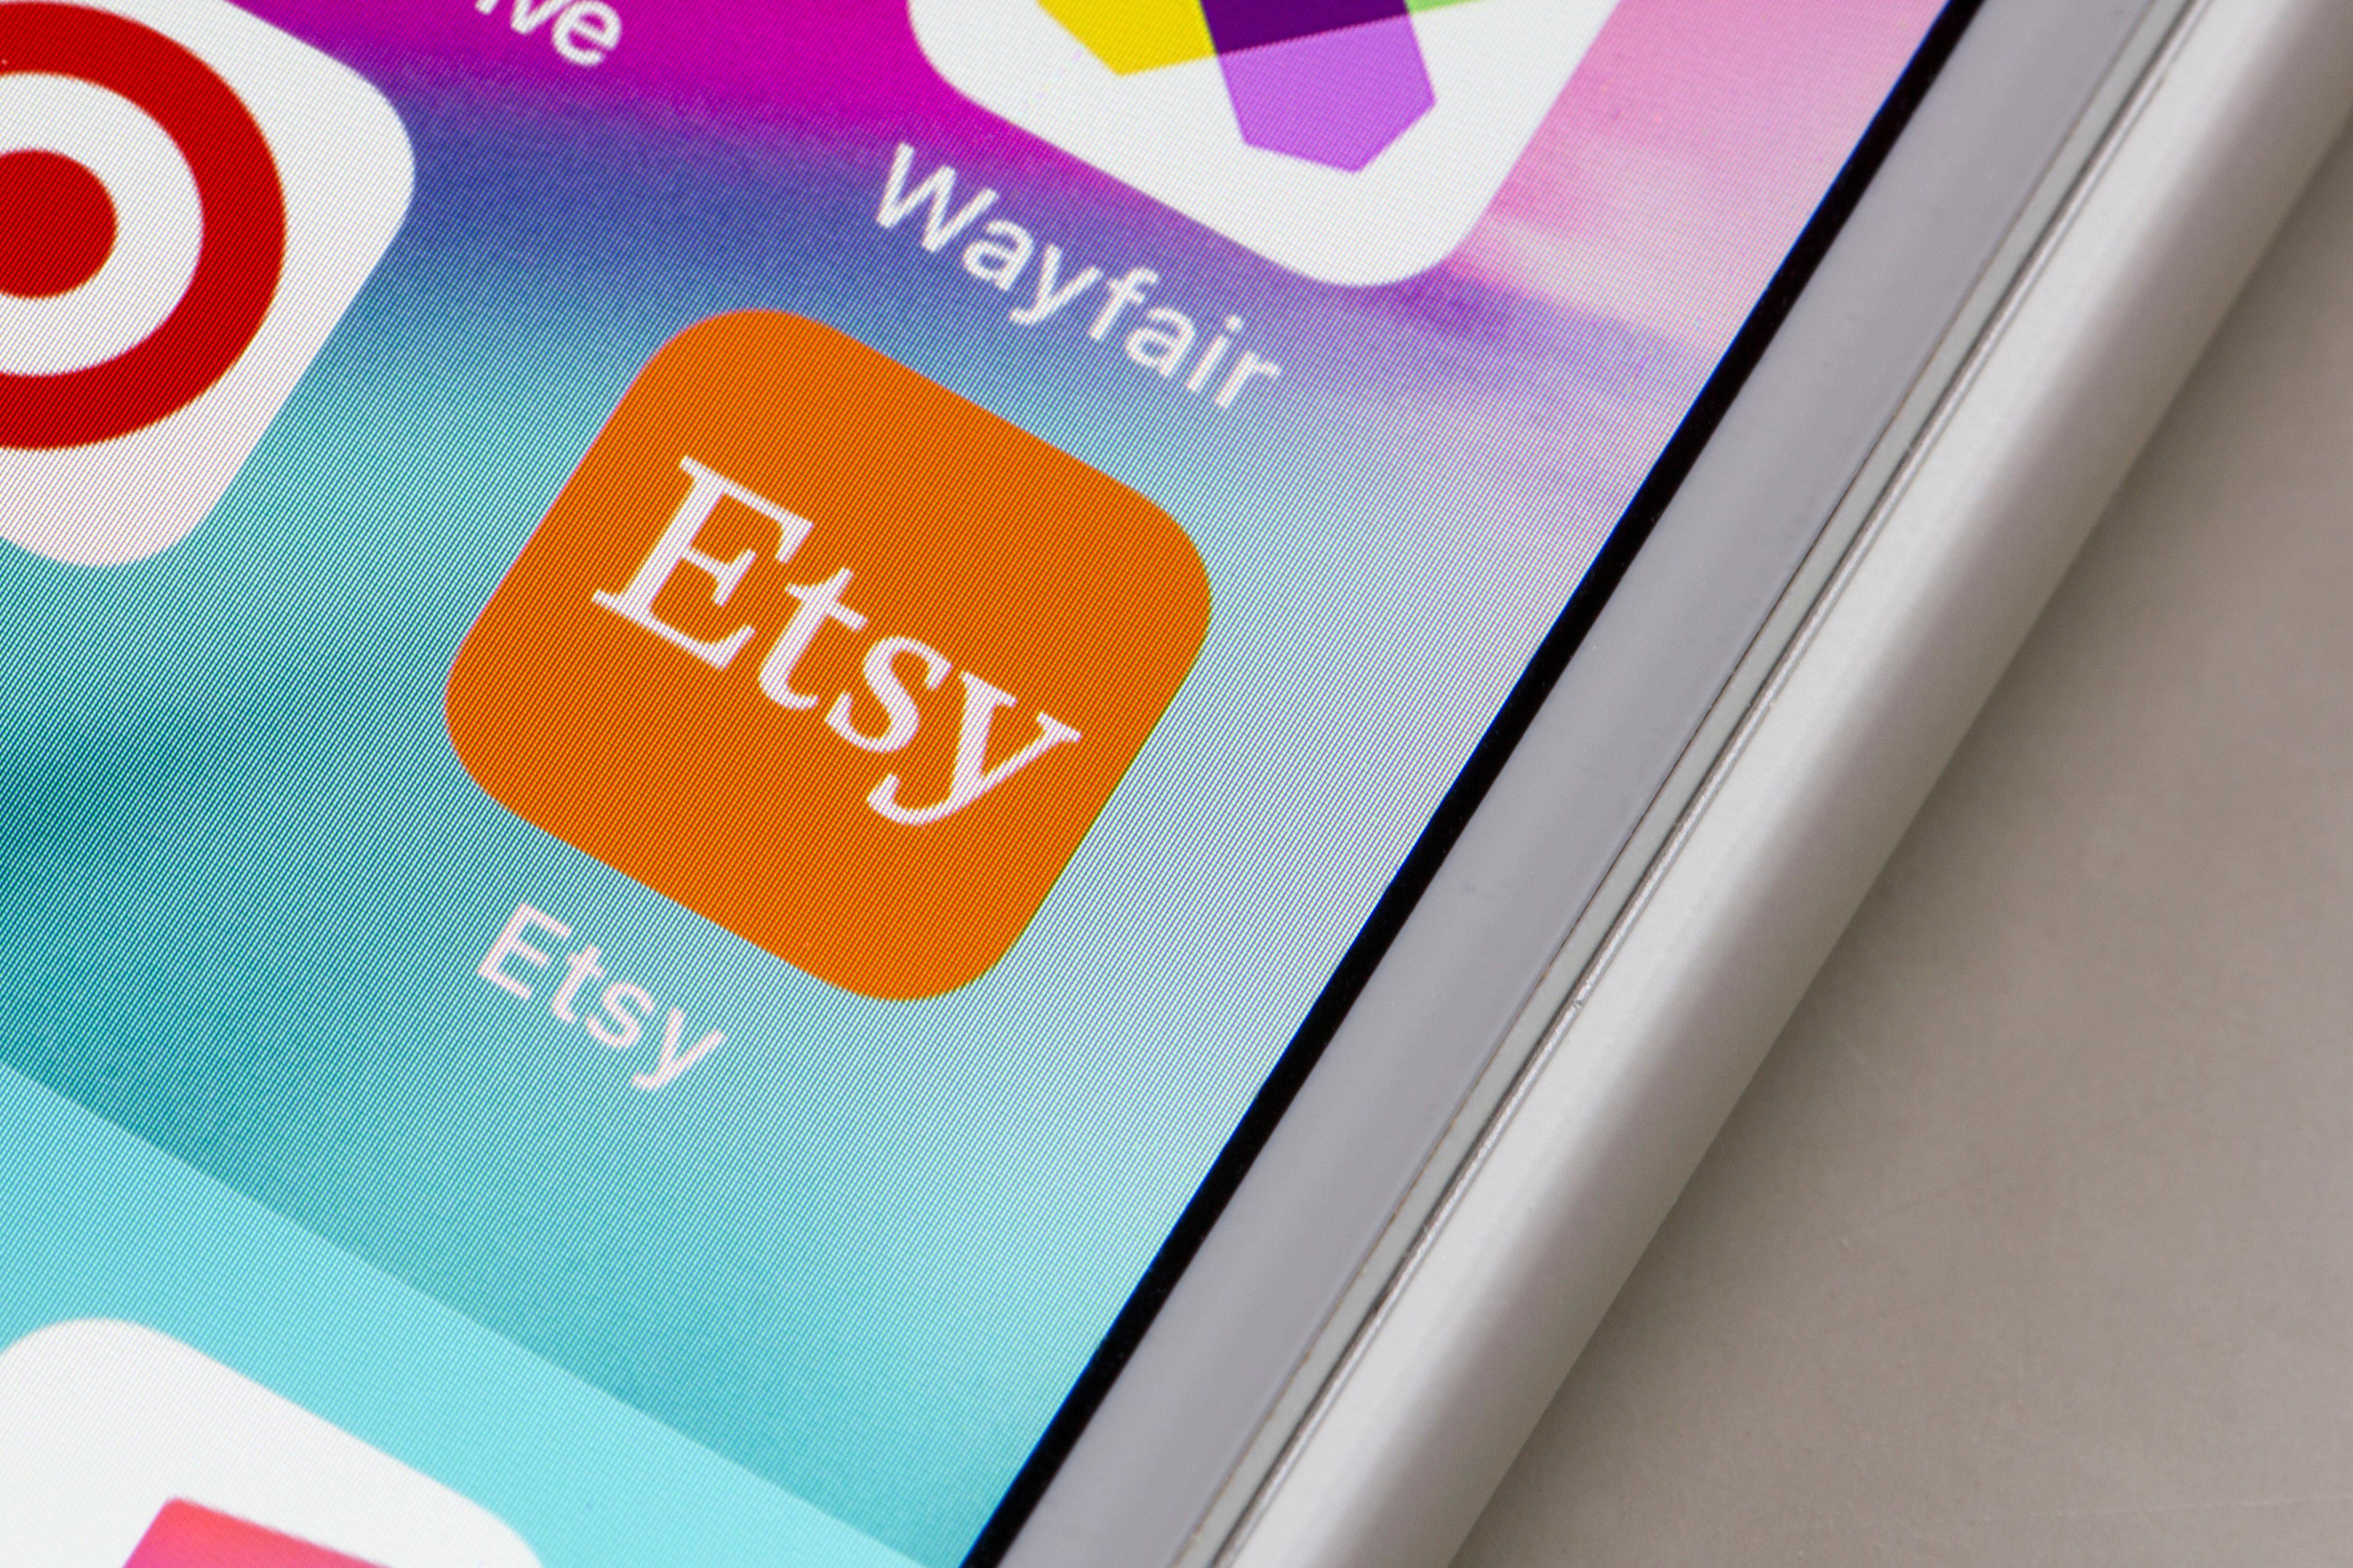 Etsy Soars Following Blowout Q2 Earnings: How To Play This Trend